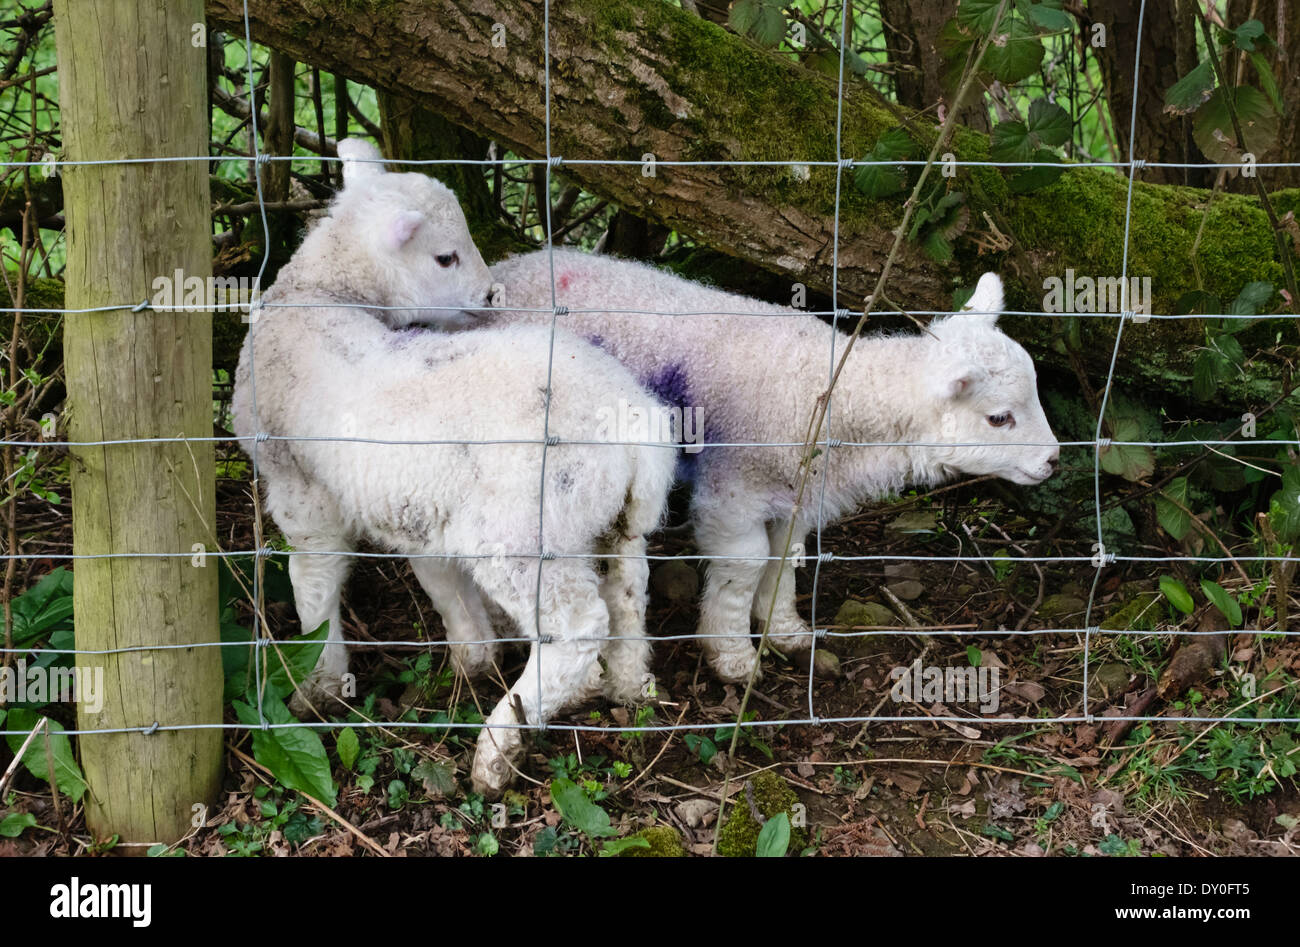 Lambs in spring, Wales, UK Stock Photo